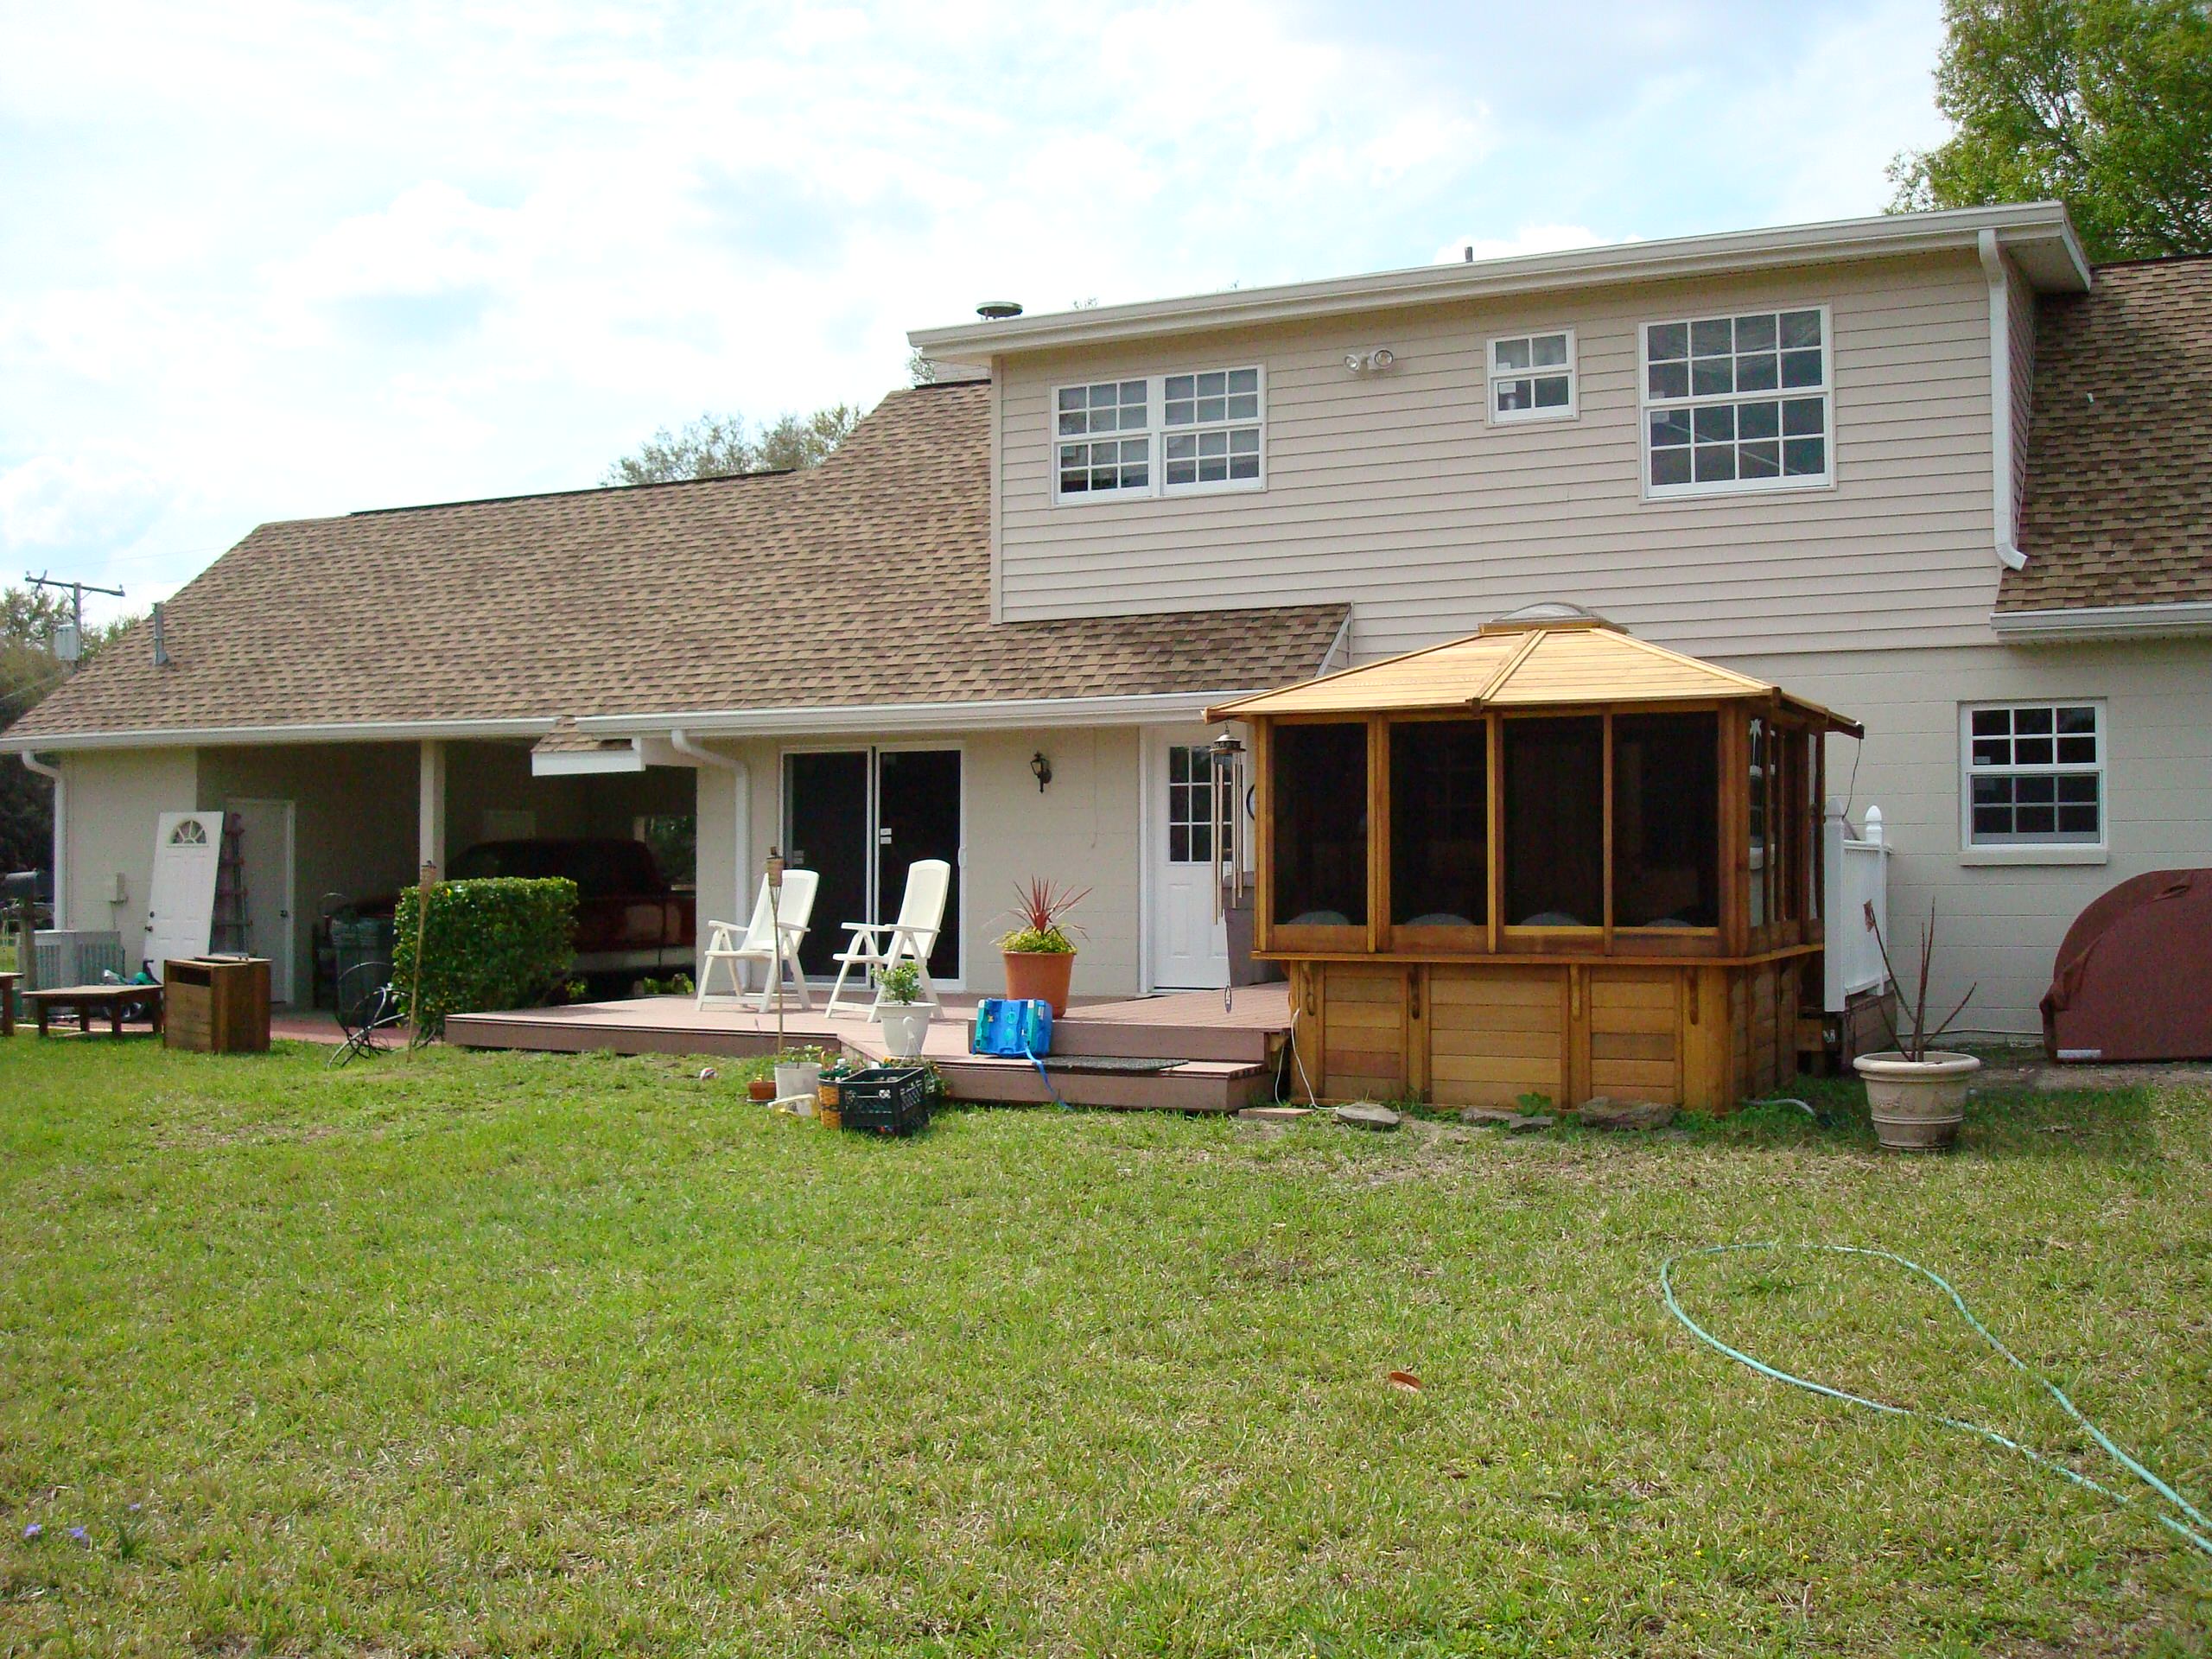 Siding Refacing Projects